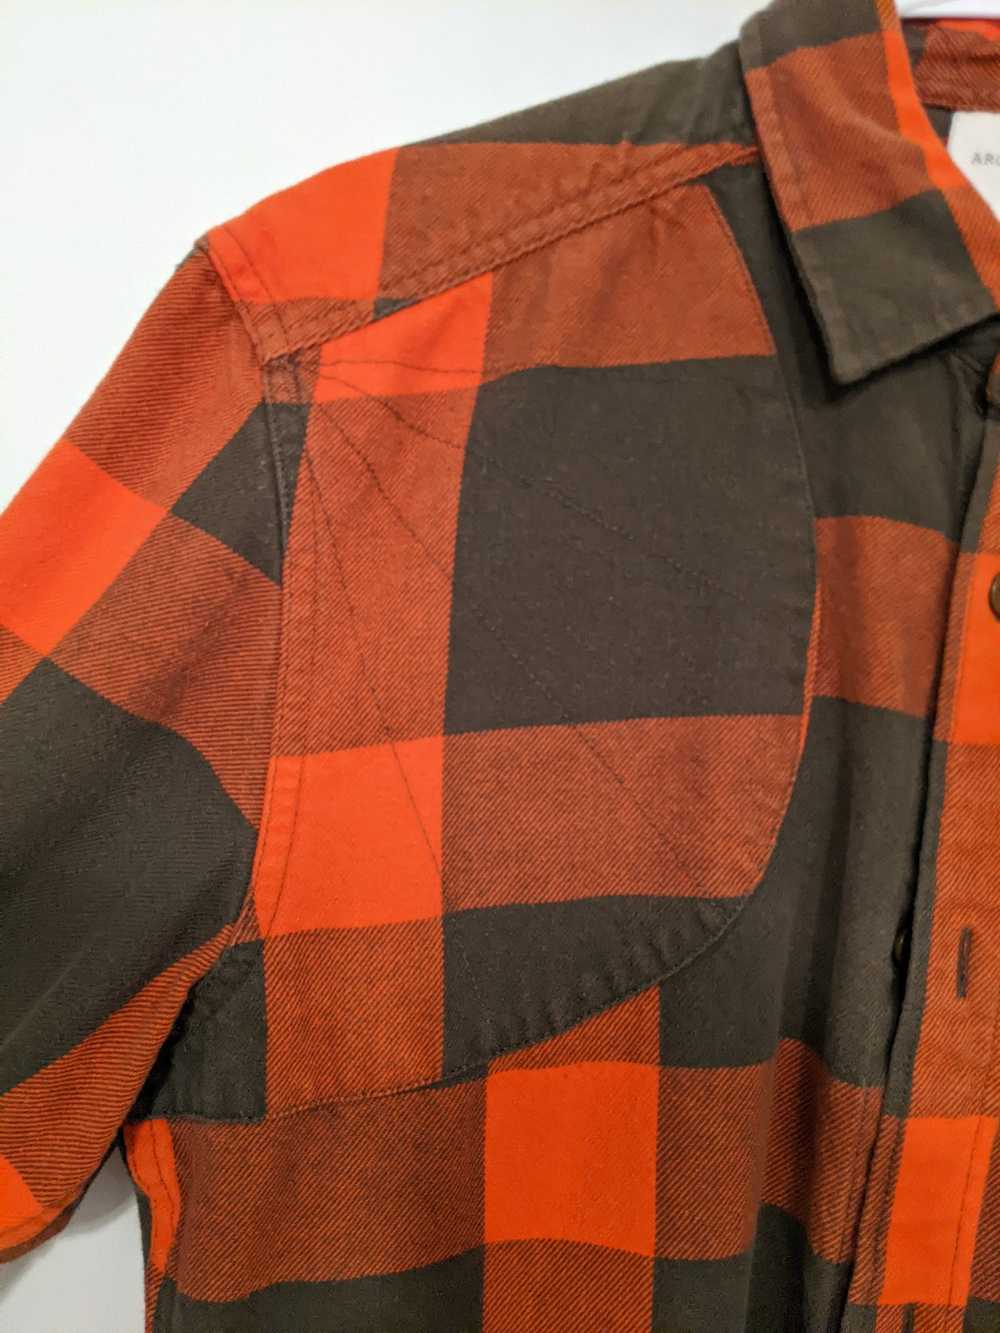 H&M Mauritz Archive - Hunting Flannel - image 3